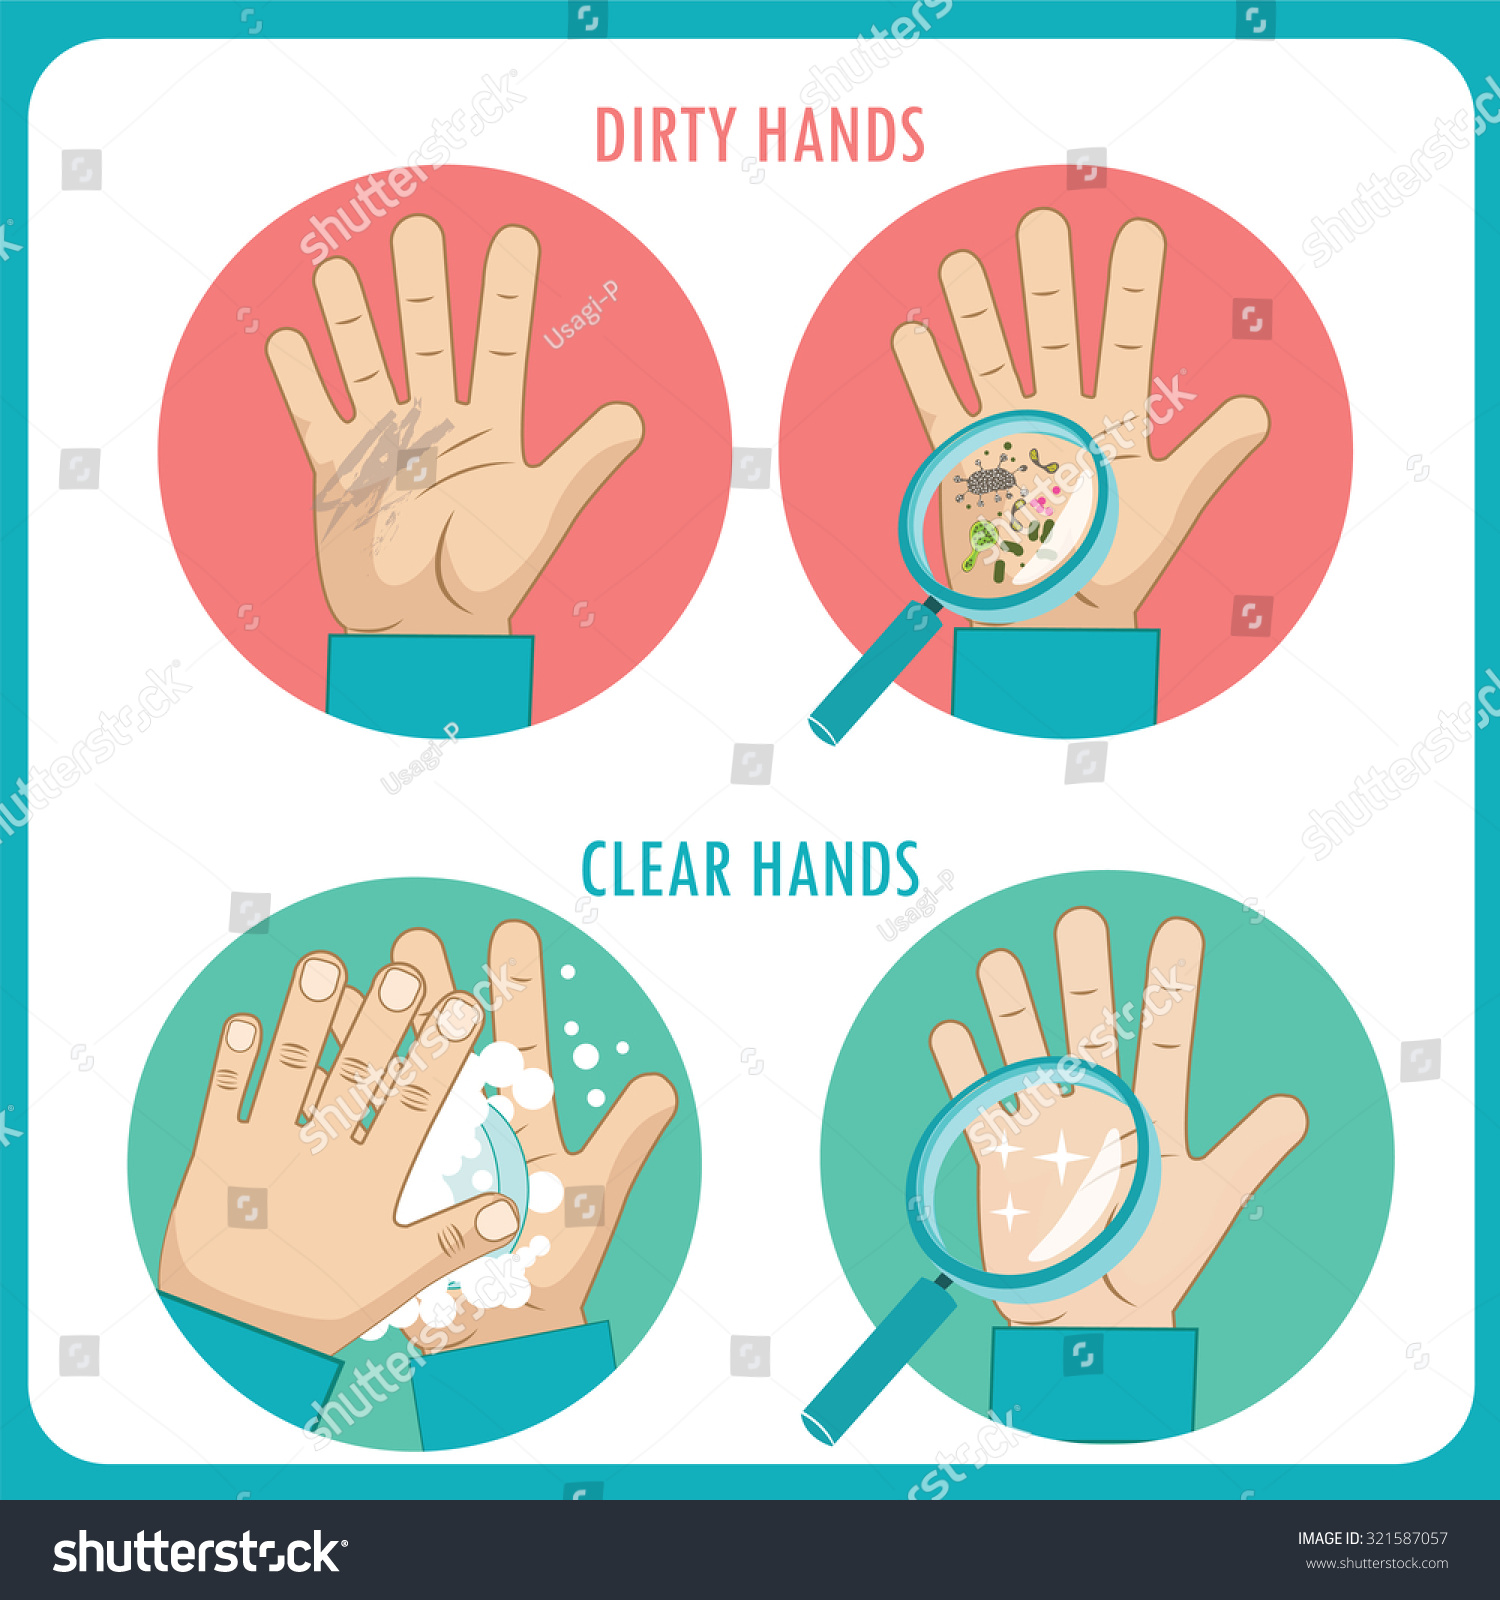 Download Dirty Hands Clear Hands Before After Stock Vector (Royalty ...